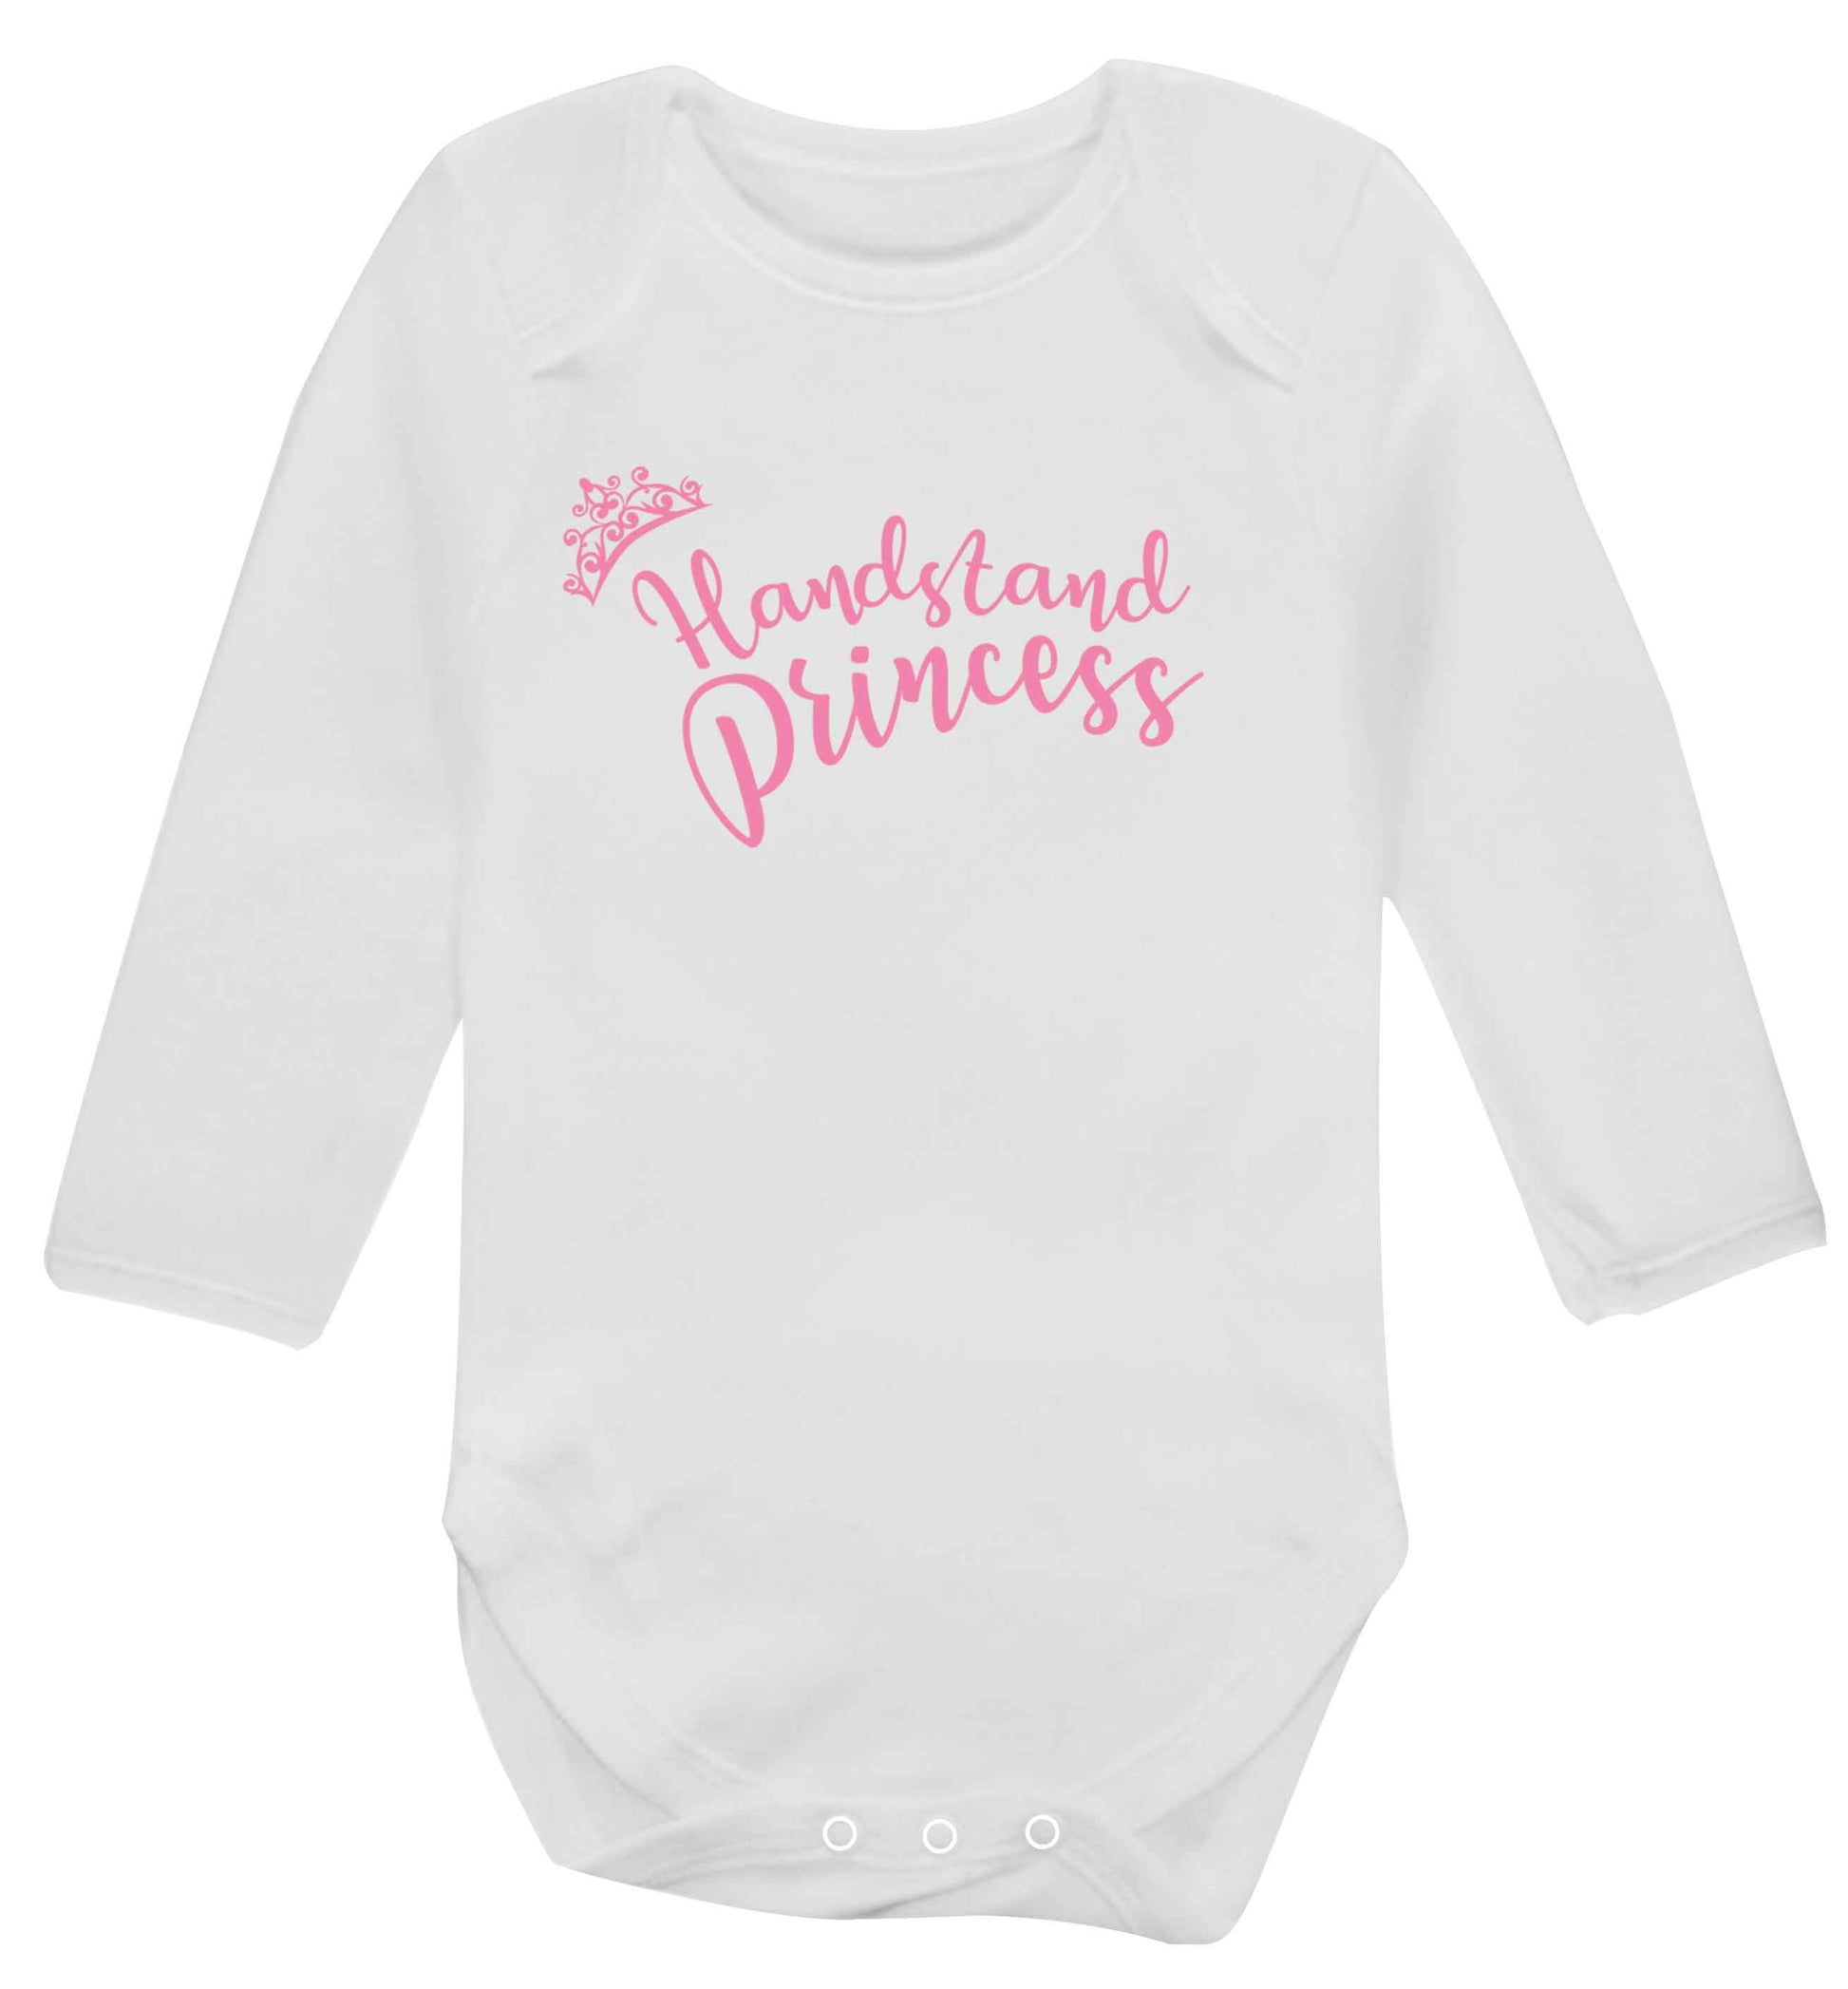 Handstand princess Baby Vest long sleeved white 6-12 months